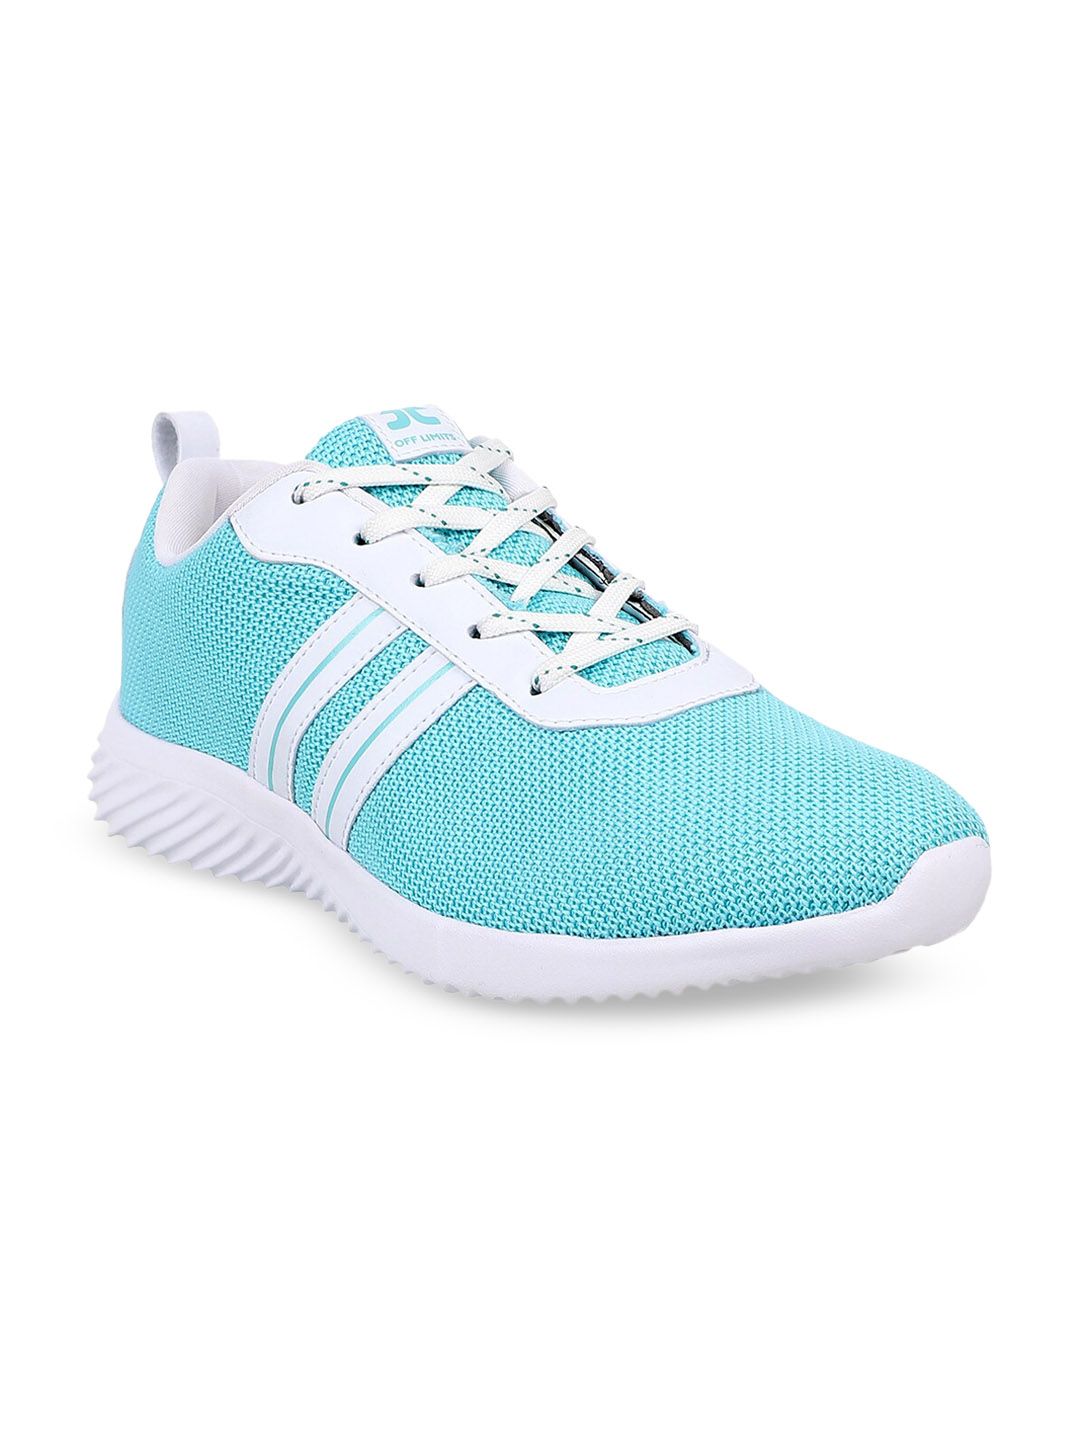 OFF LIMITS Women Blue & White Running Shoes Price in India